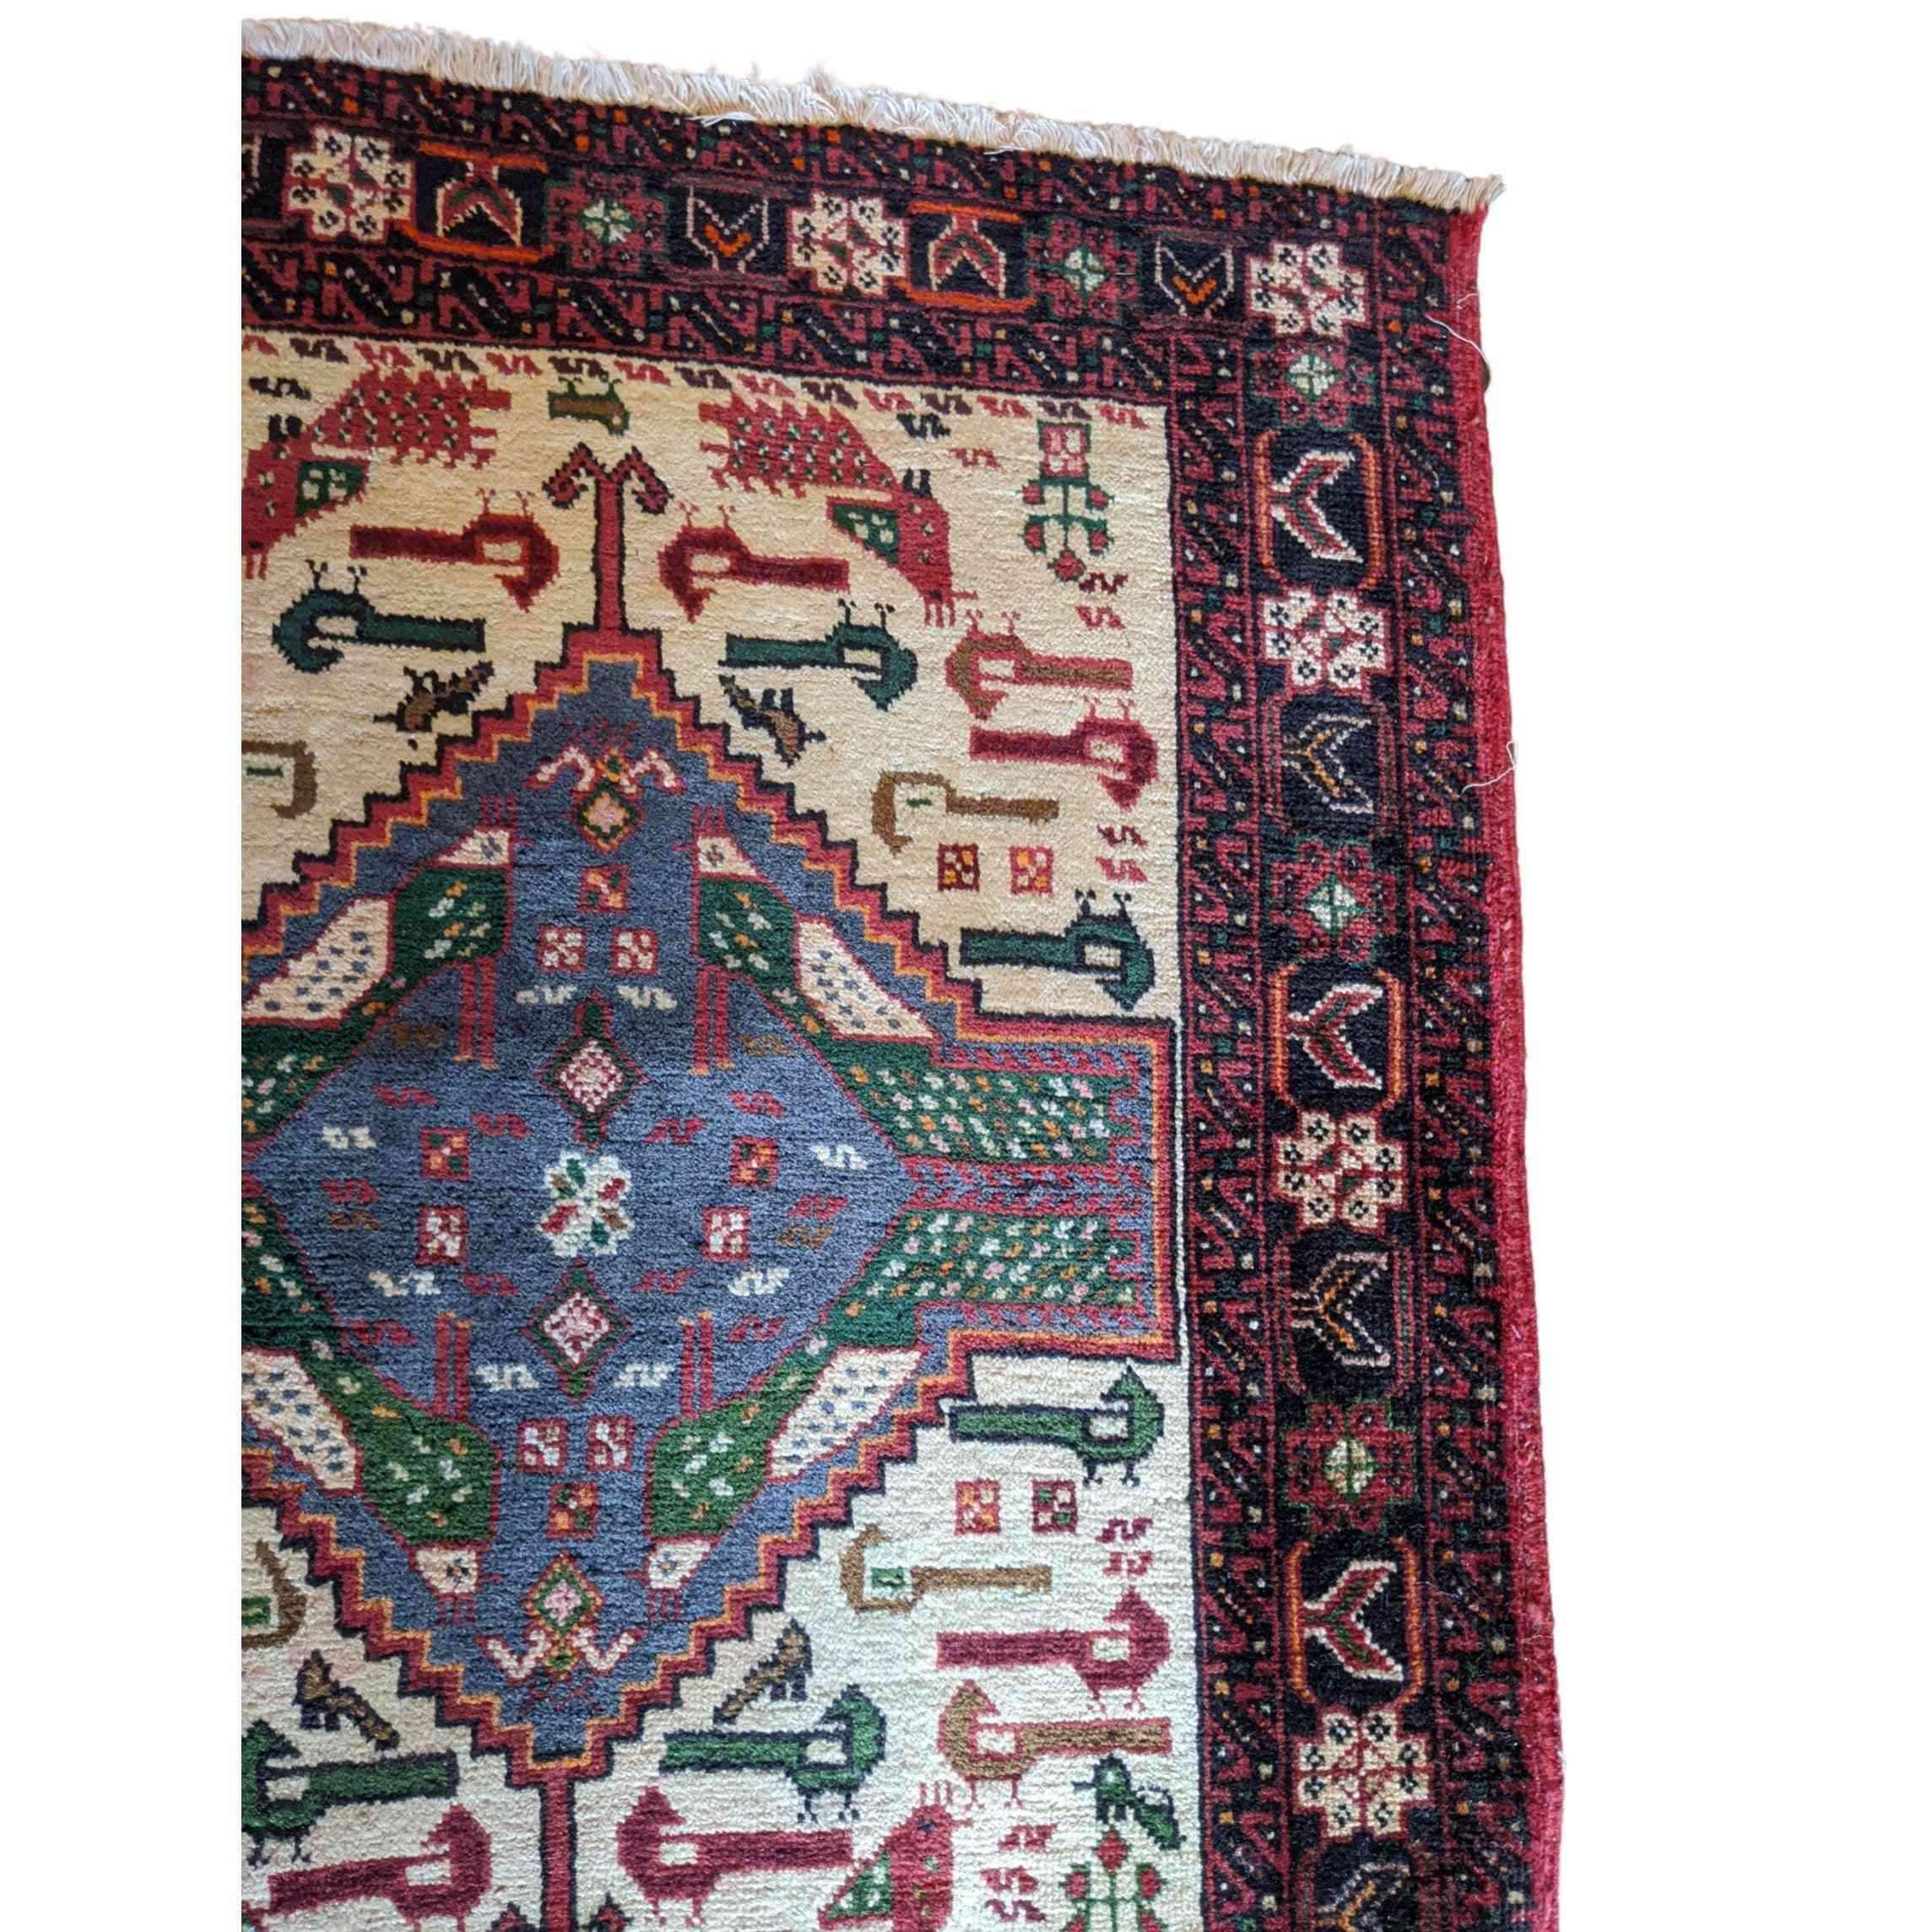 92 x 72 cm Persian Baluch Traditional Red Small Rug - Rugmaster